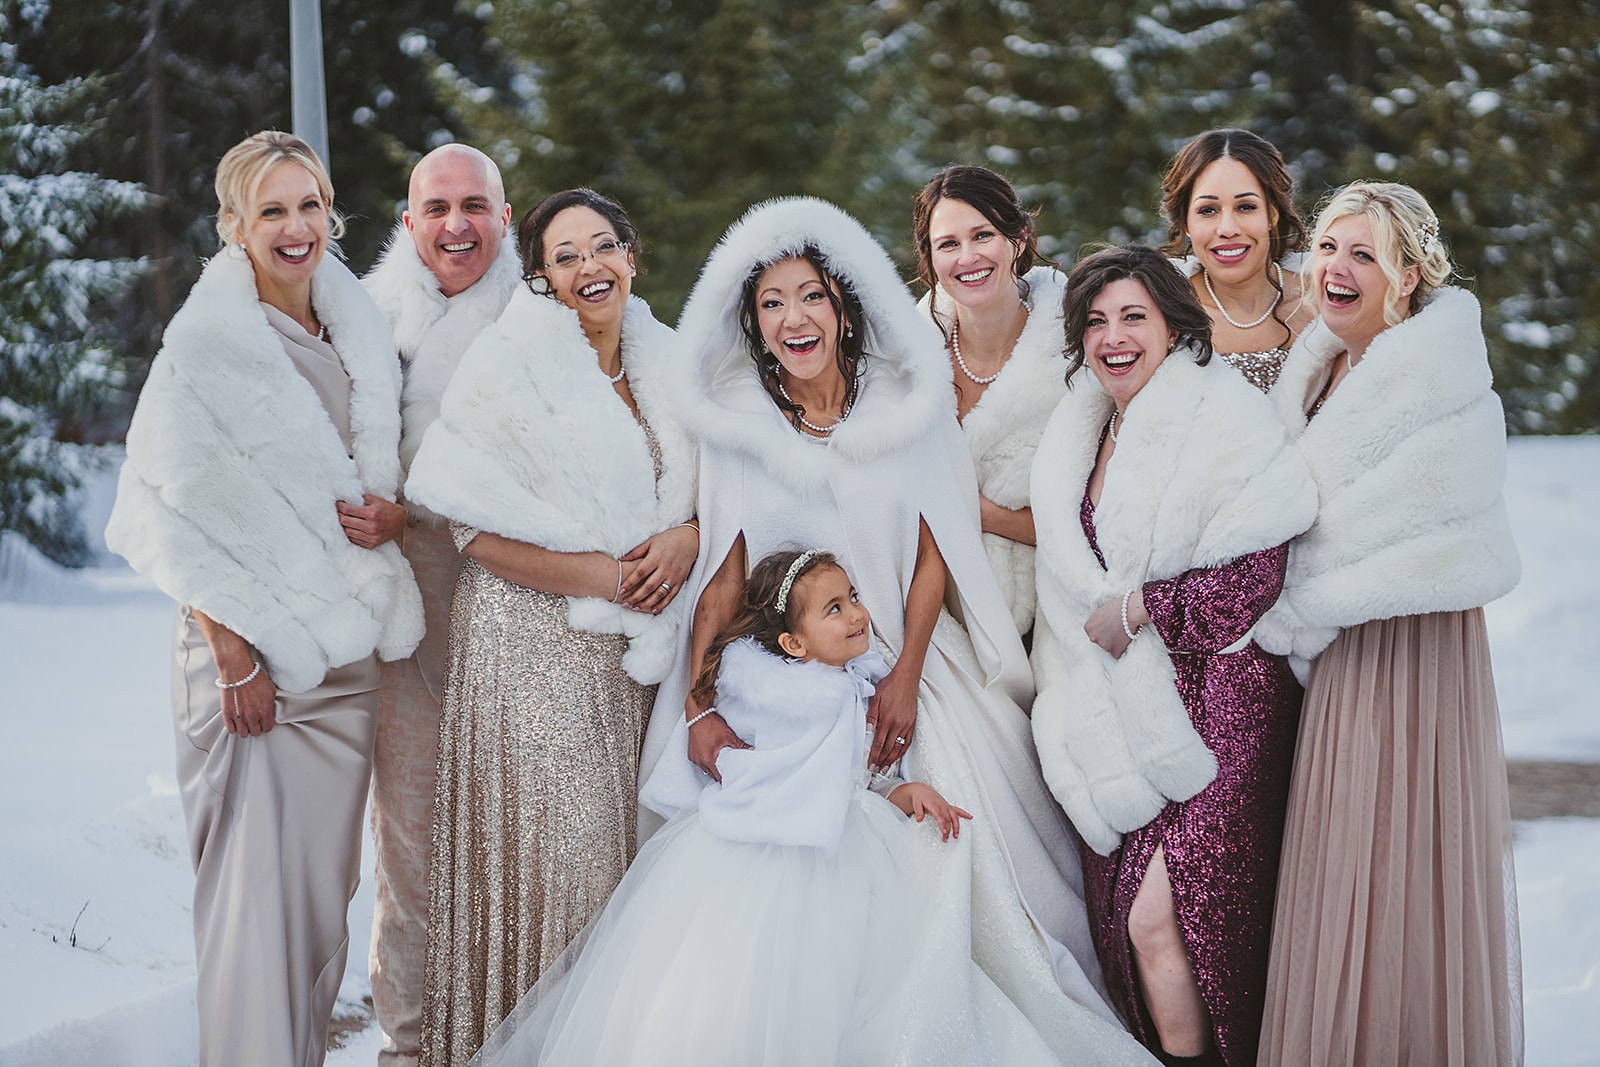 A bridal party in the Interalpen Hotel in the Tyrol in Austria